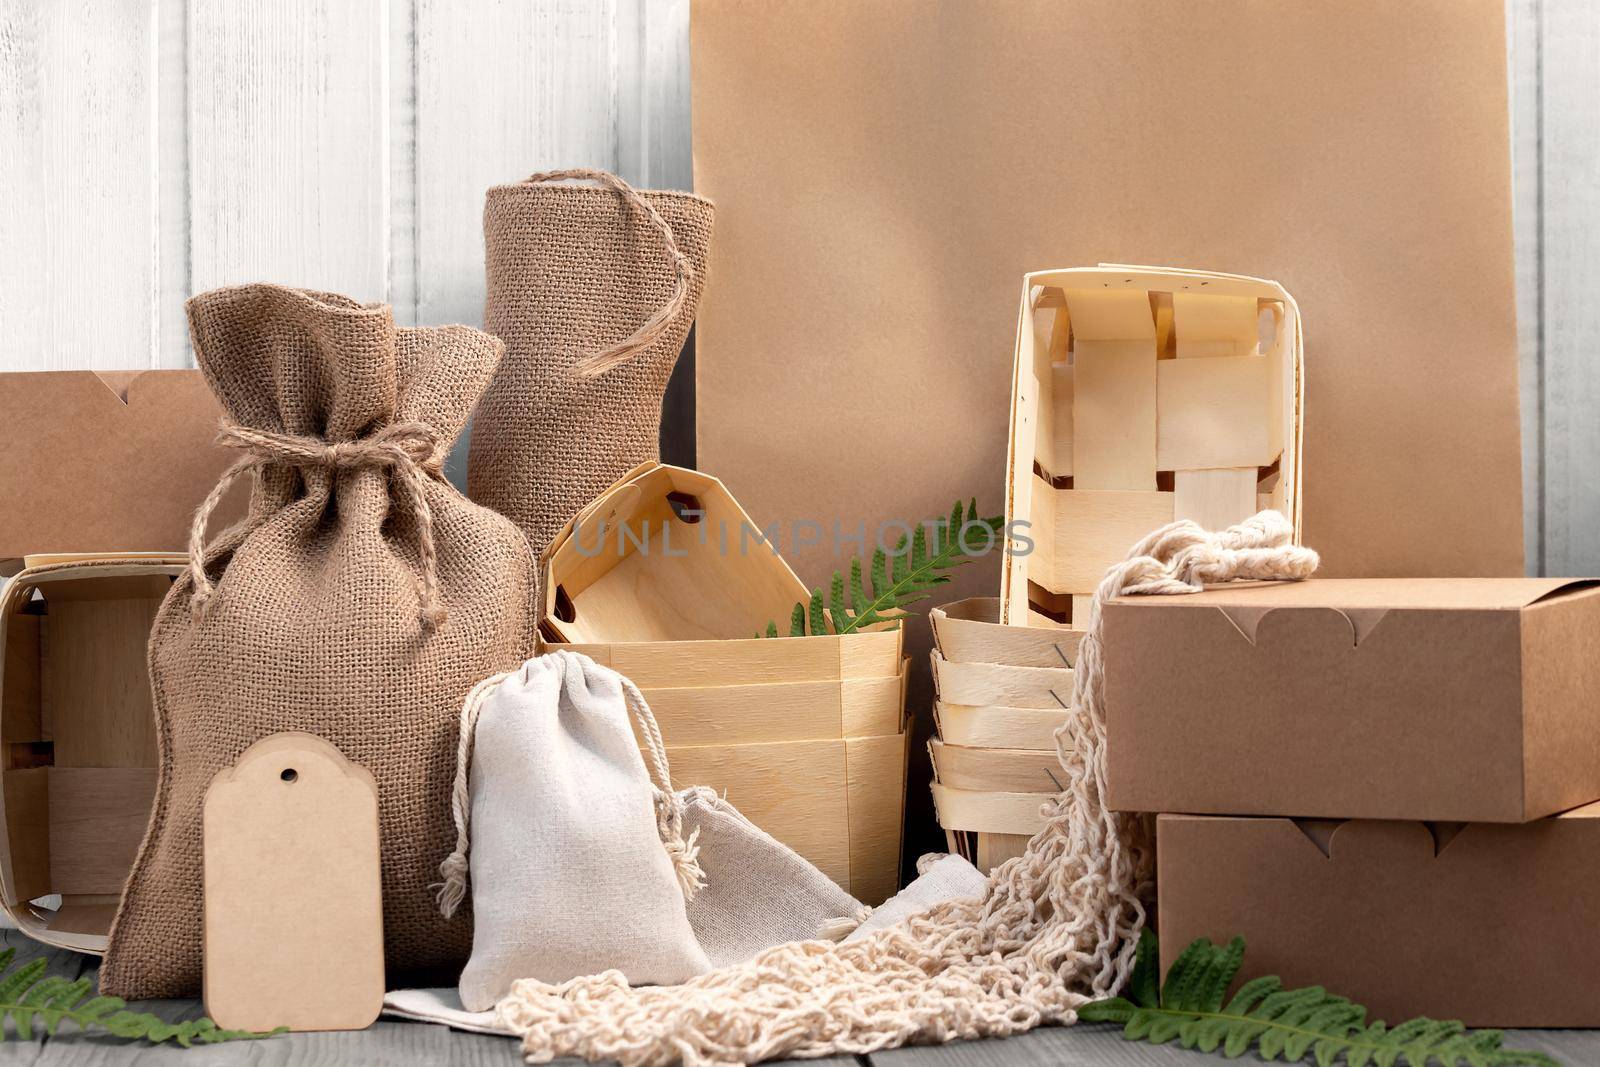 Various Eco friendly packaging made from natural recyclable materials. Environmental protection and waste reduction concept.